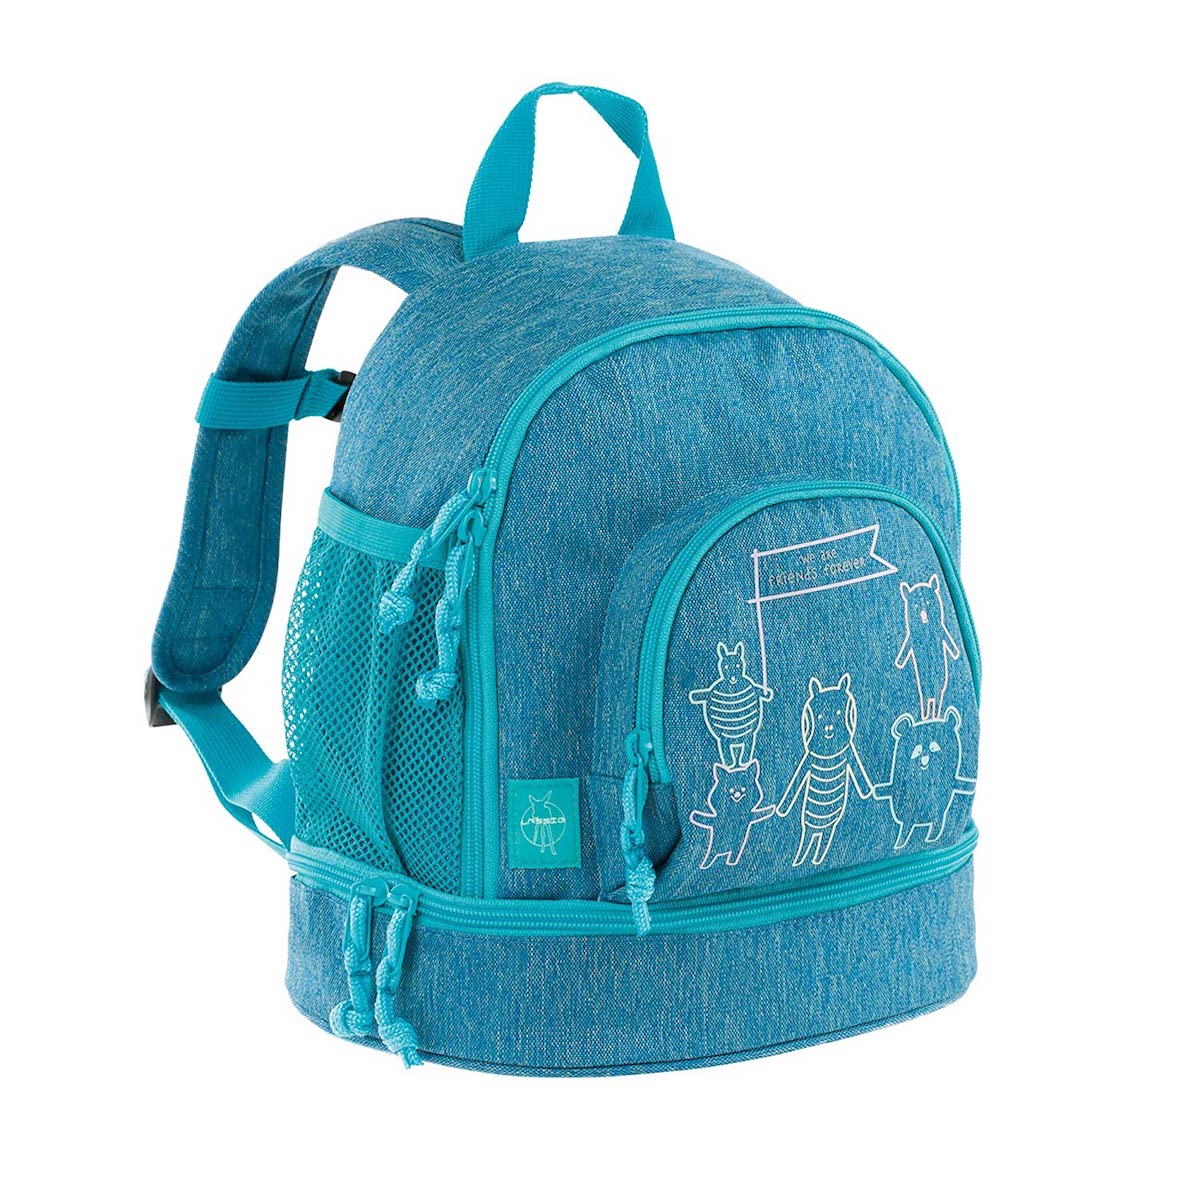 - Kids Friends & Backpack Mini About Baby - Destination Grey Lassig